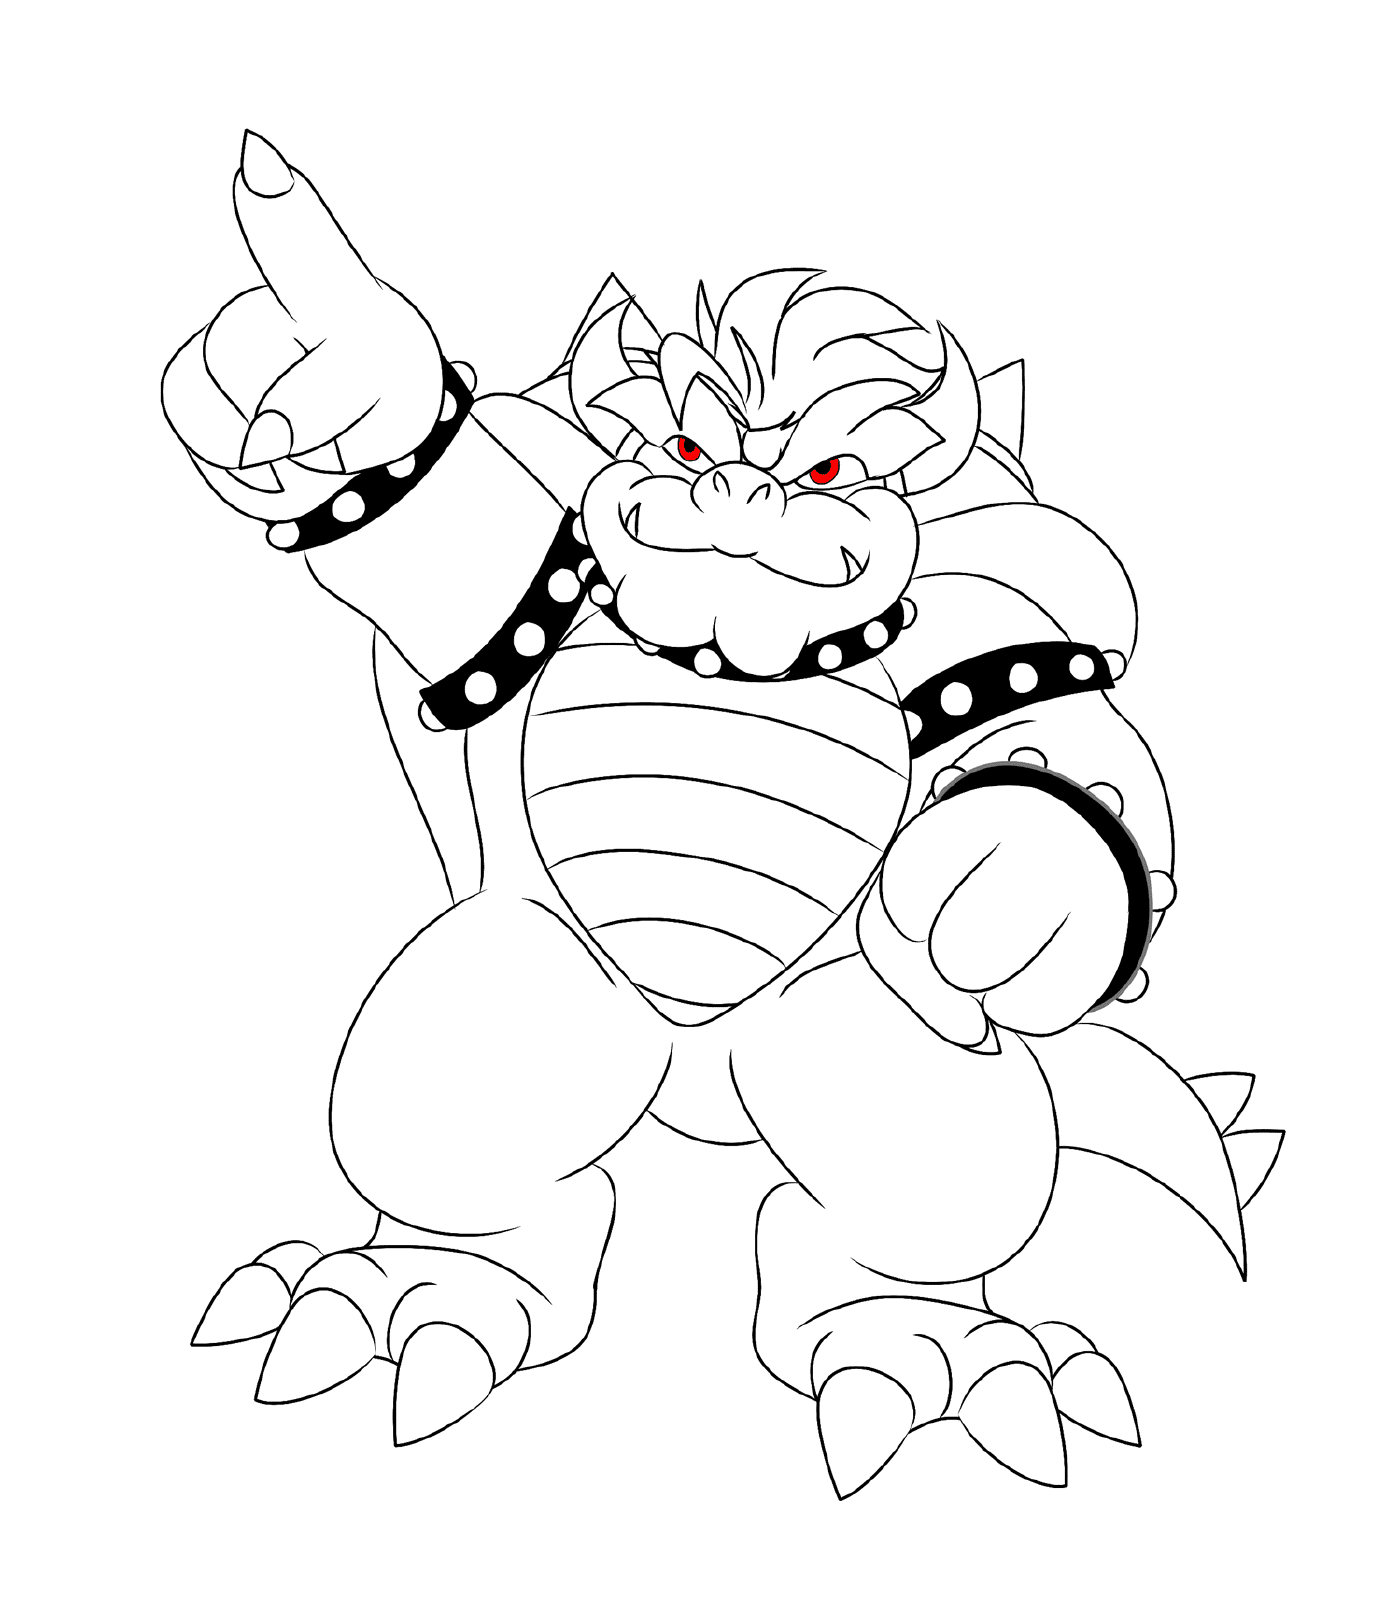  Bowser with red eyes 